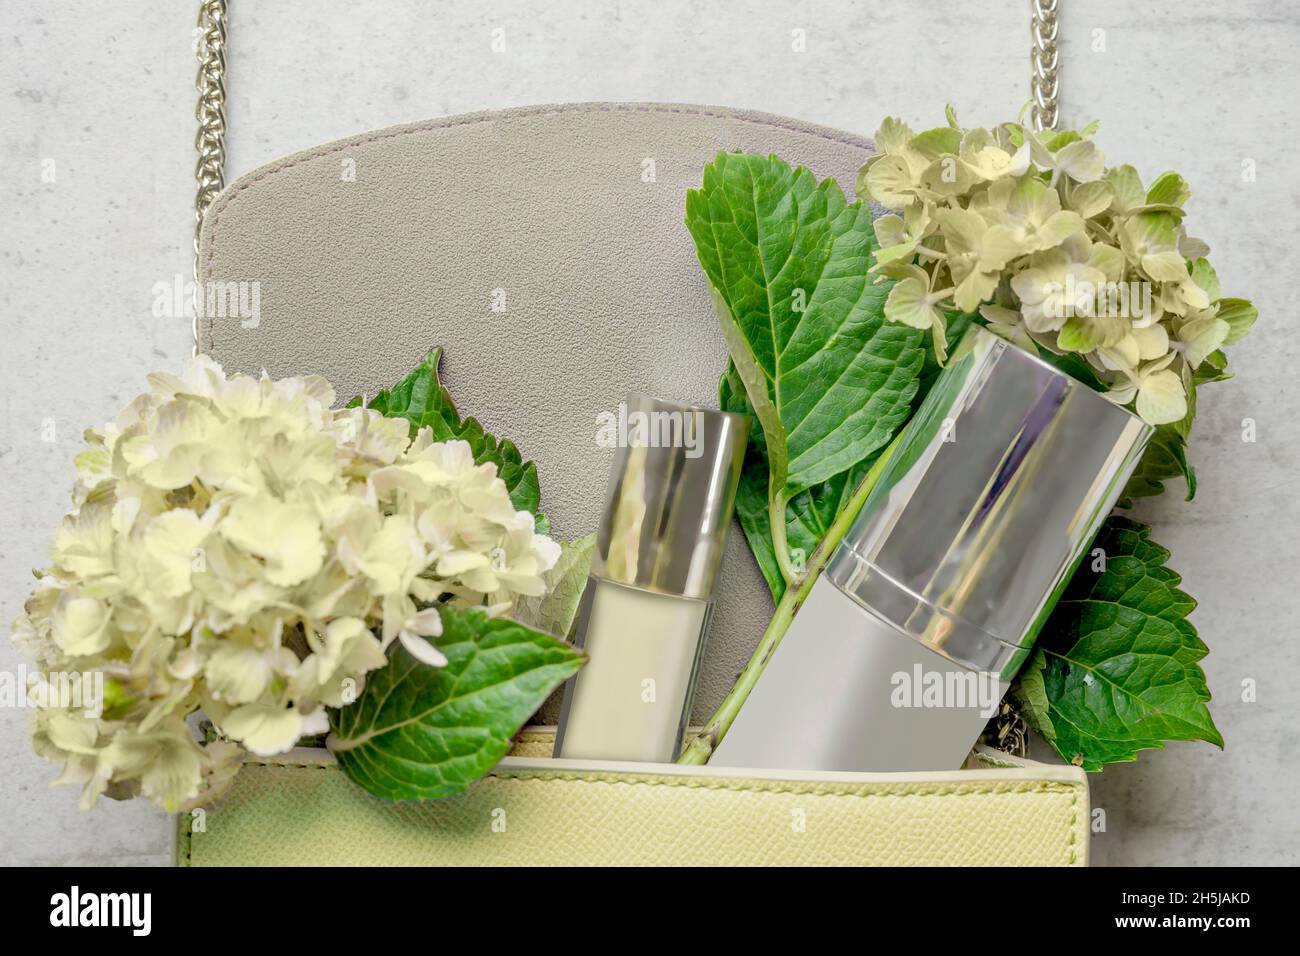 Pale yellow handbag with cosmetic bottle, lipgloss and hydrangea flowers on white wooden background. Feminine lifestyle concept. Top view. Stock Photo